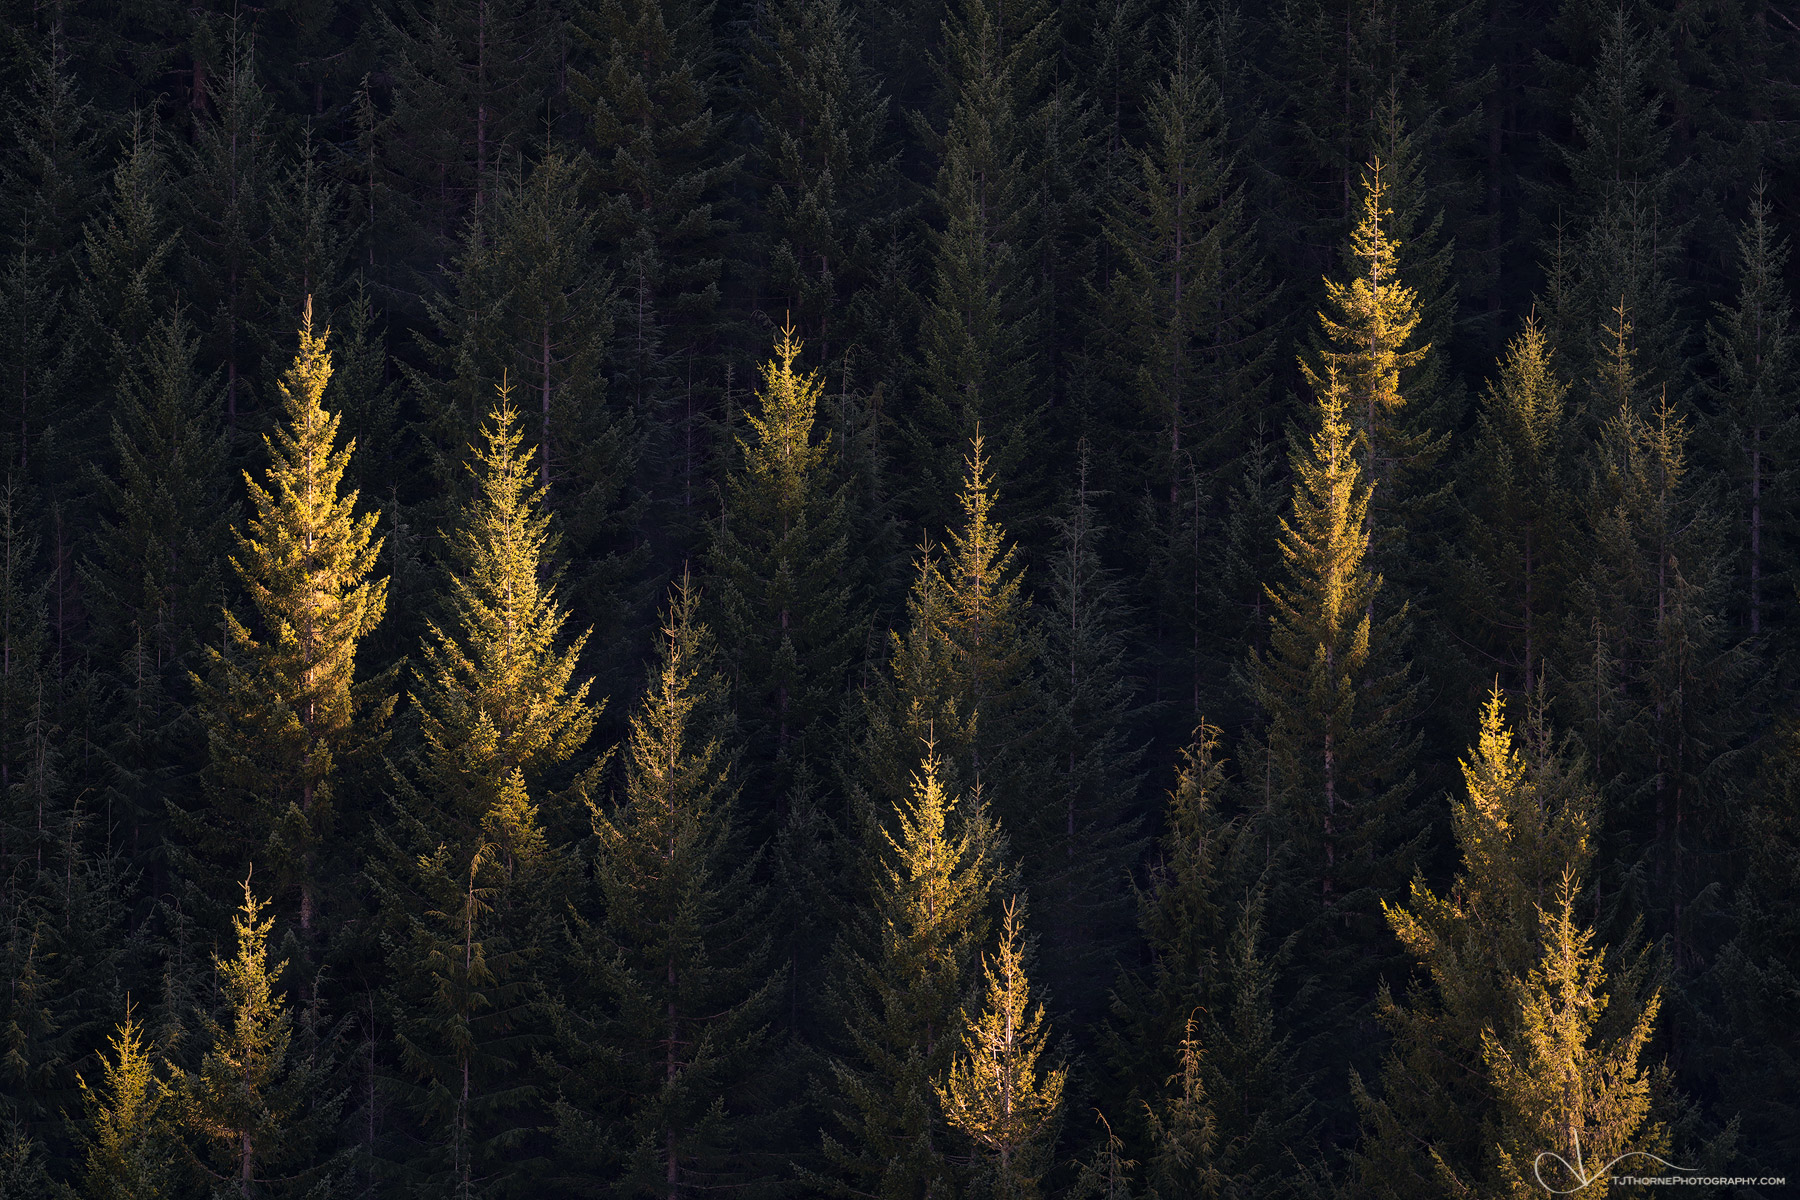 Evening light illuminates the tips of adolescent douglas fir trees in Mt. Hood National Forest, Oregon. I couldn’t tell you...